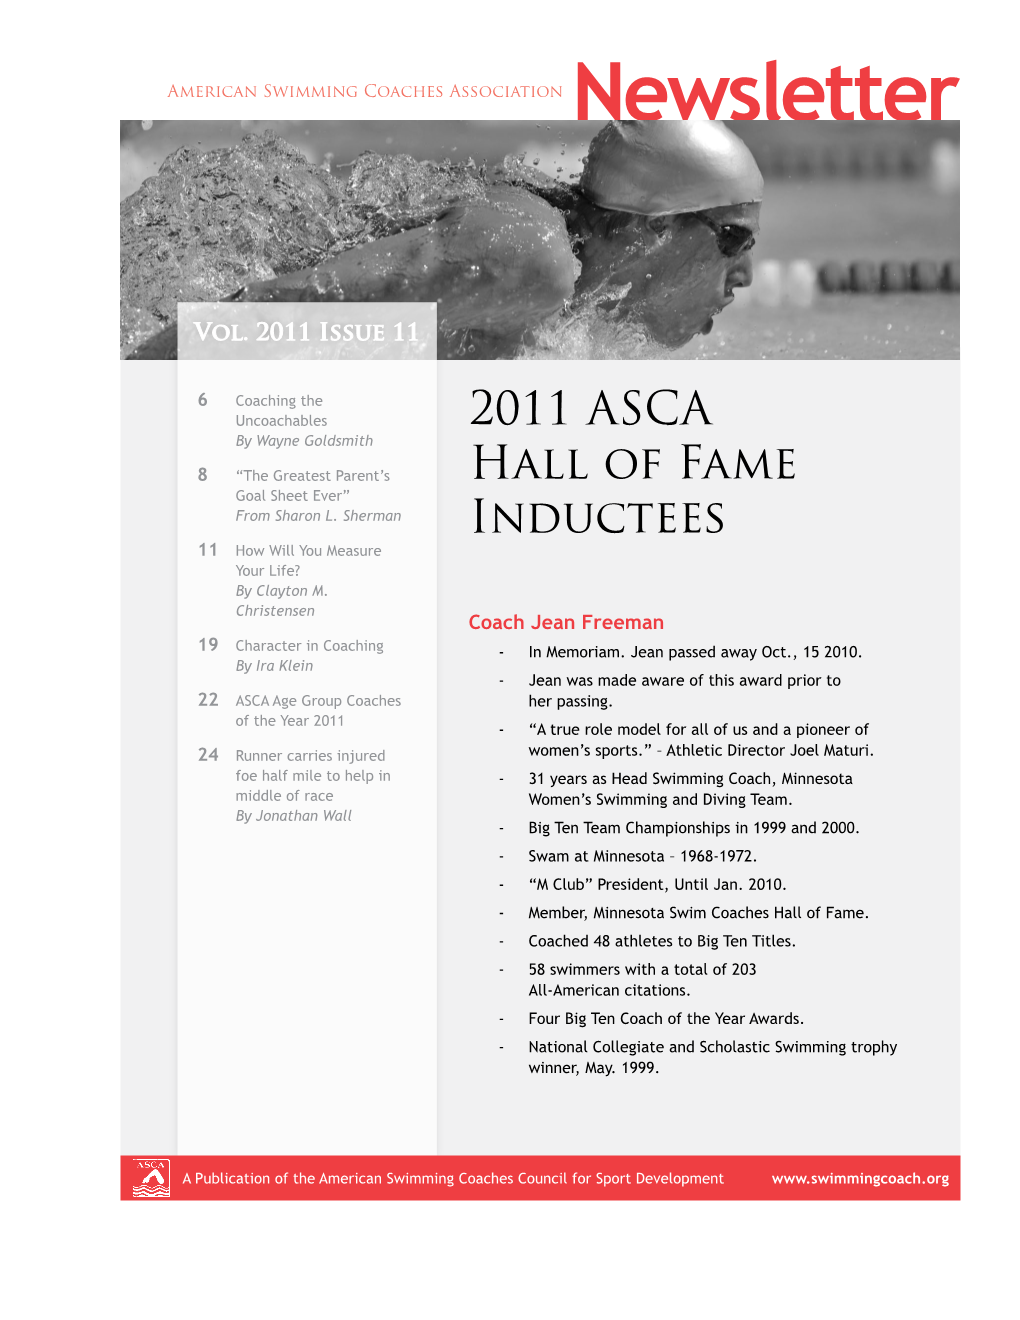 2011 ASCA Hall of Fame Inductees